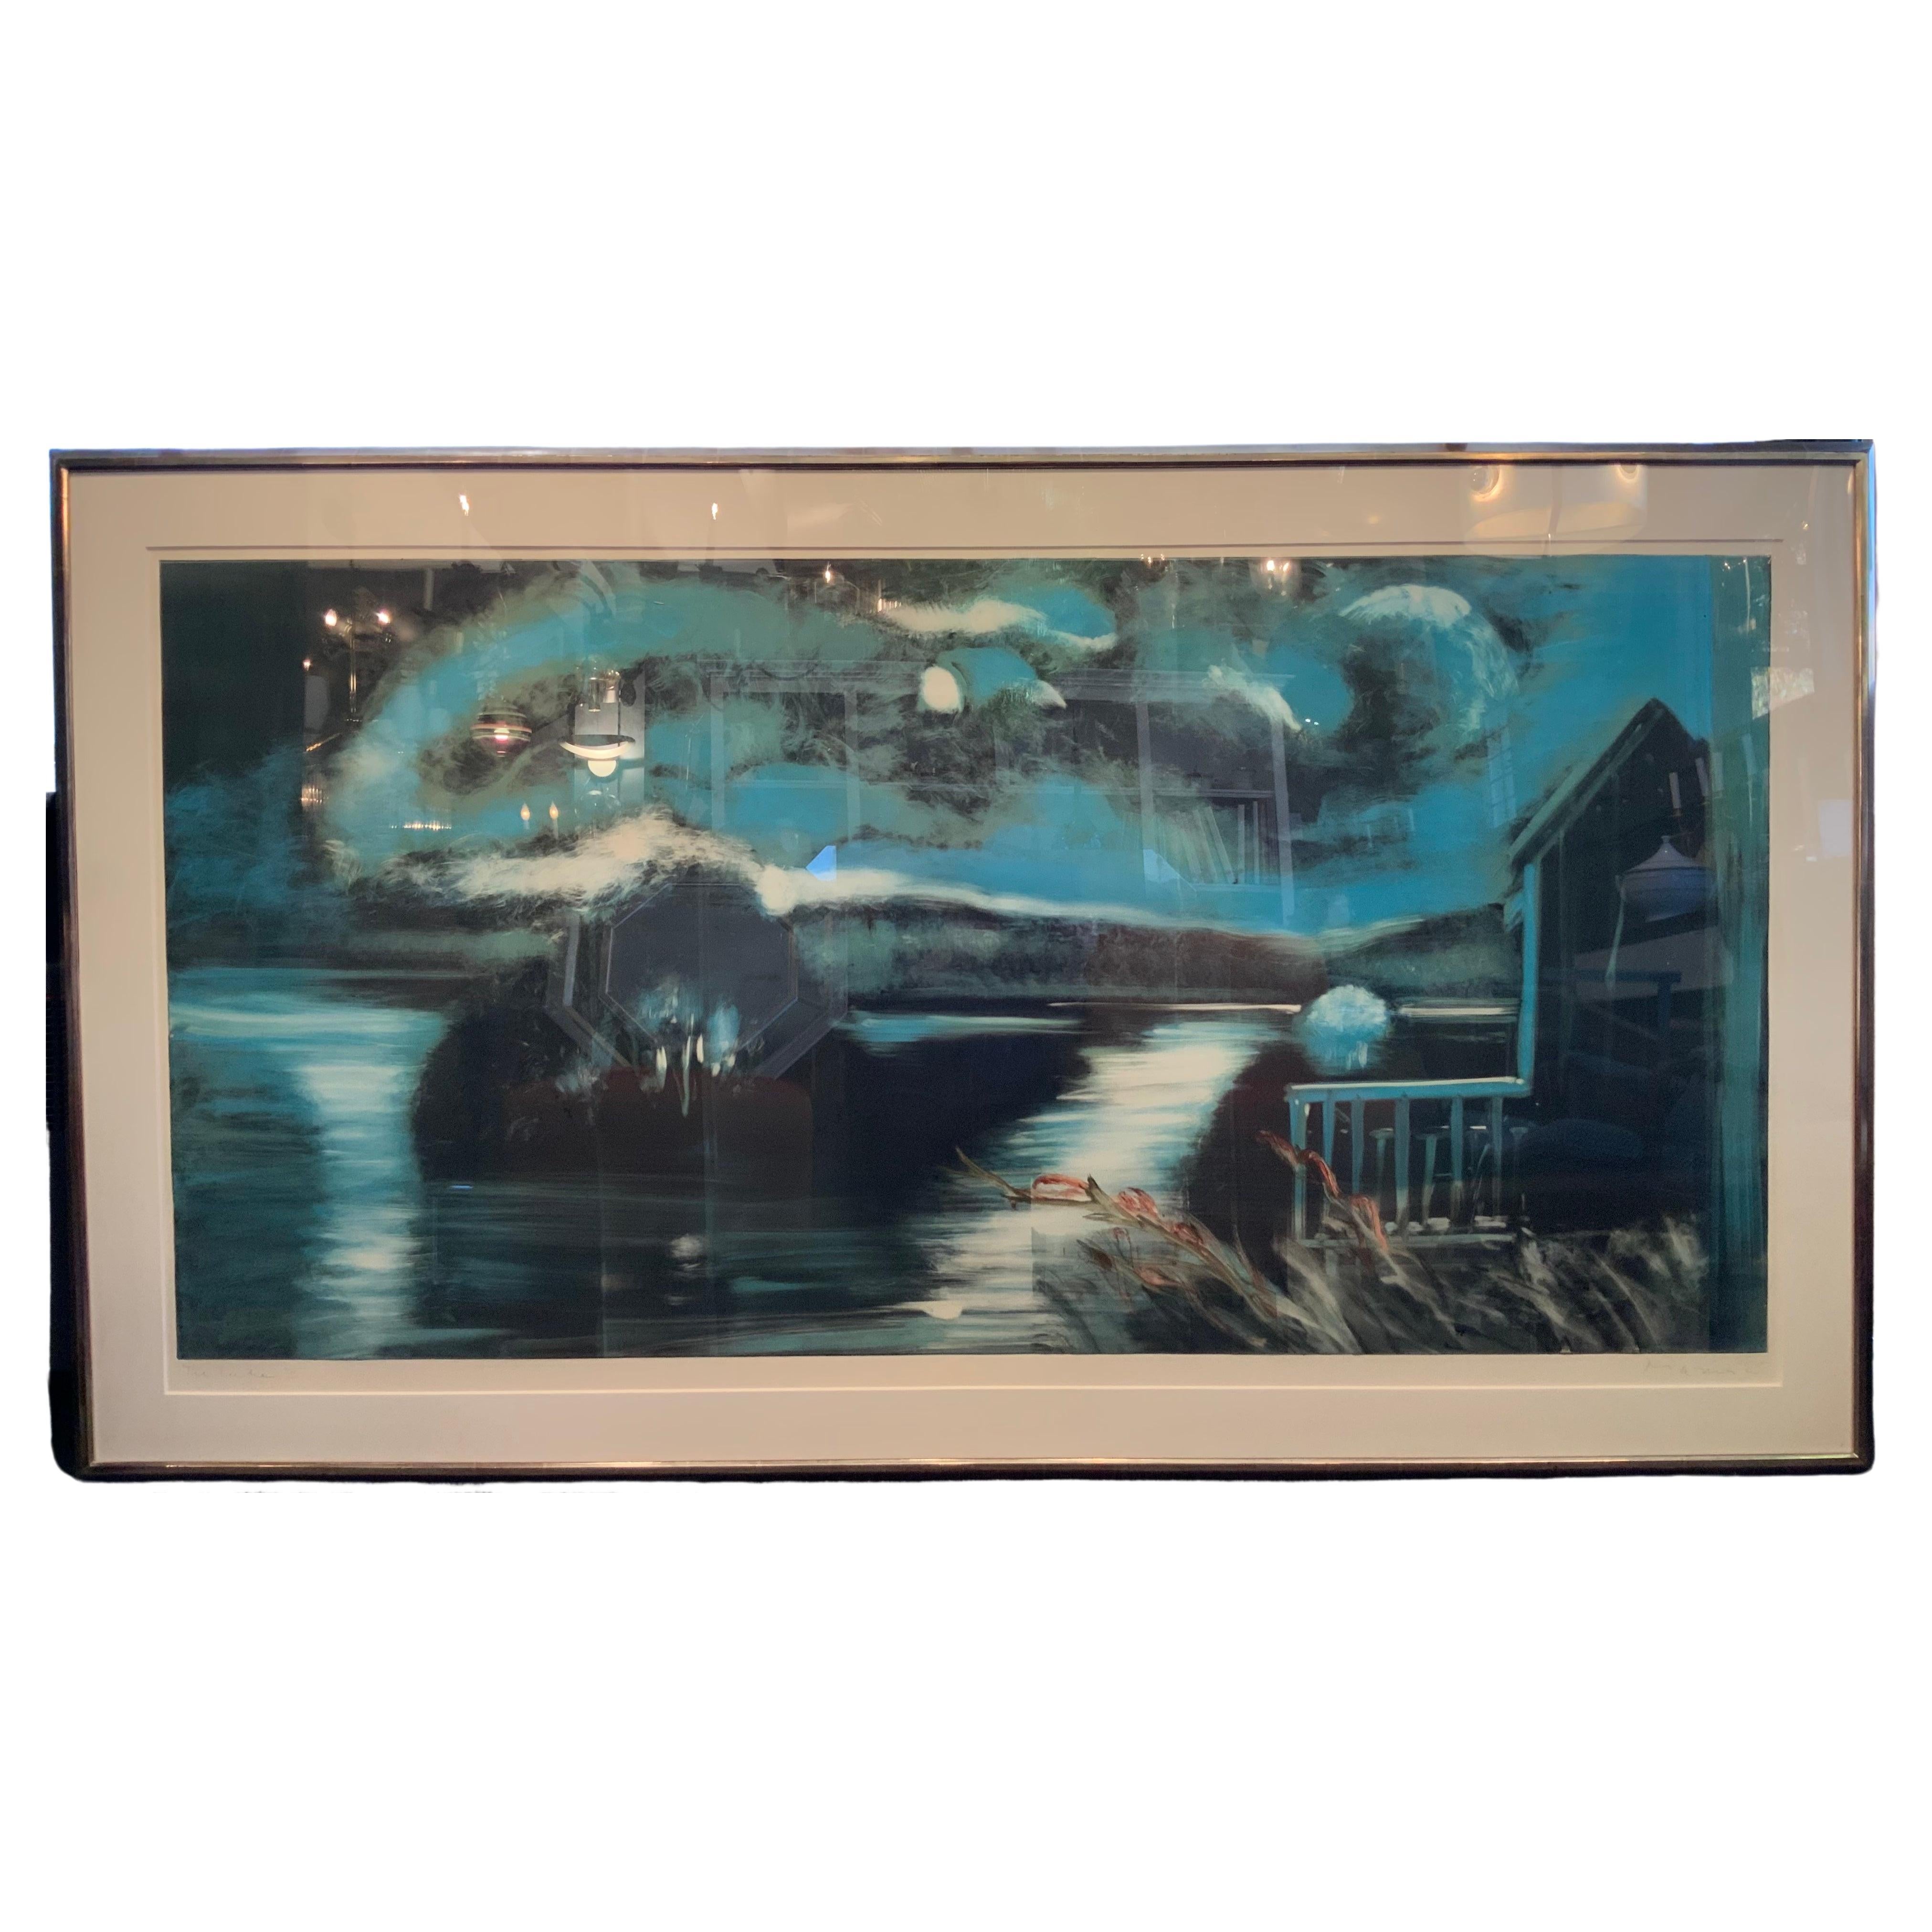 Michael Mazur (American 1935) - The Lake II 1985
Pencil signed and dates 1985 lower right; titled lower left
Color: Monotype
Professionally framed. in very good condition.    
Provenance: John C. Stoller Gallery, Minneapolis, Minnesota